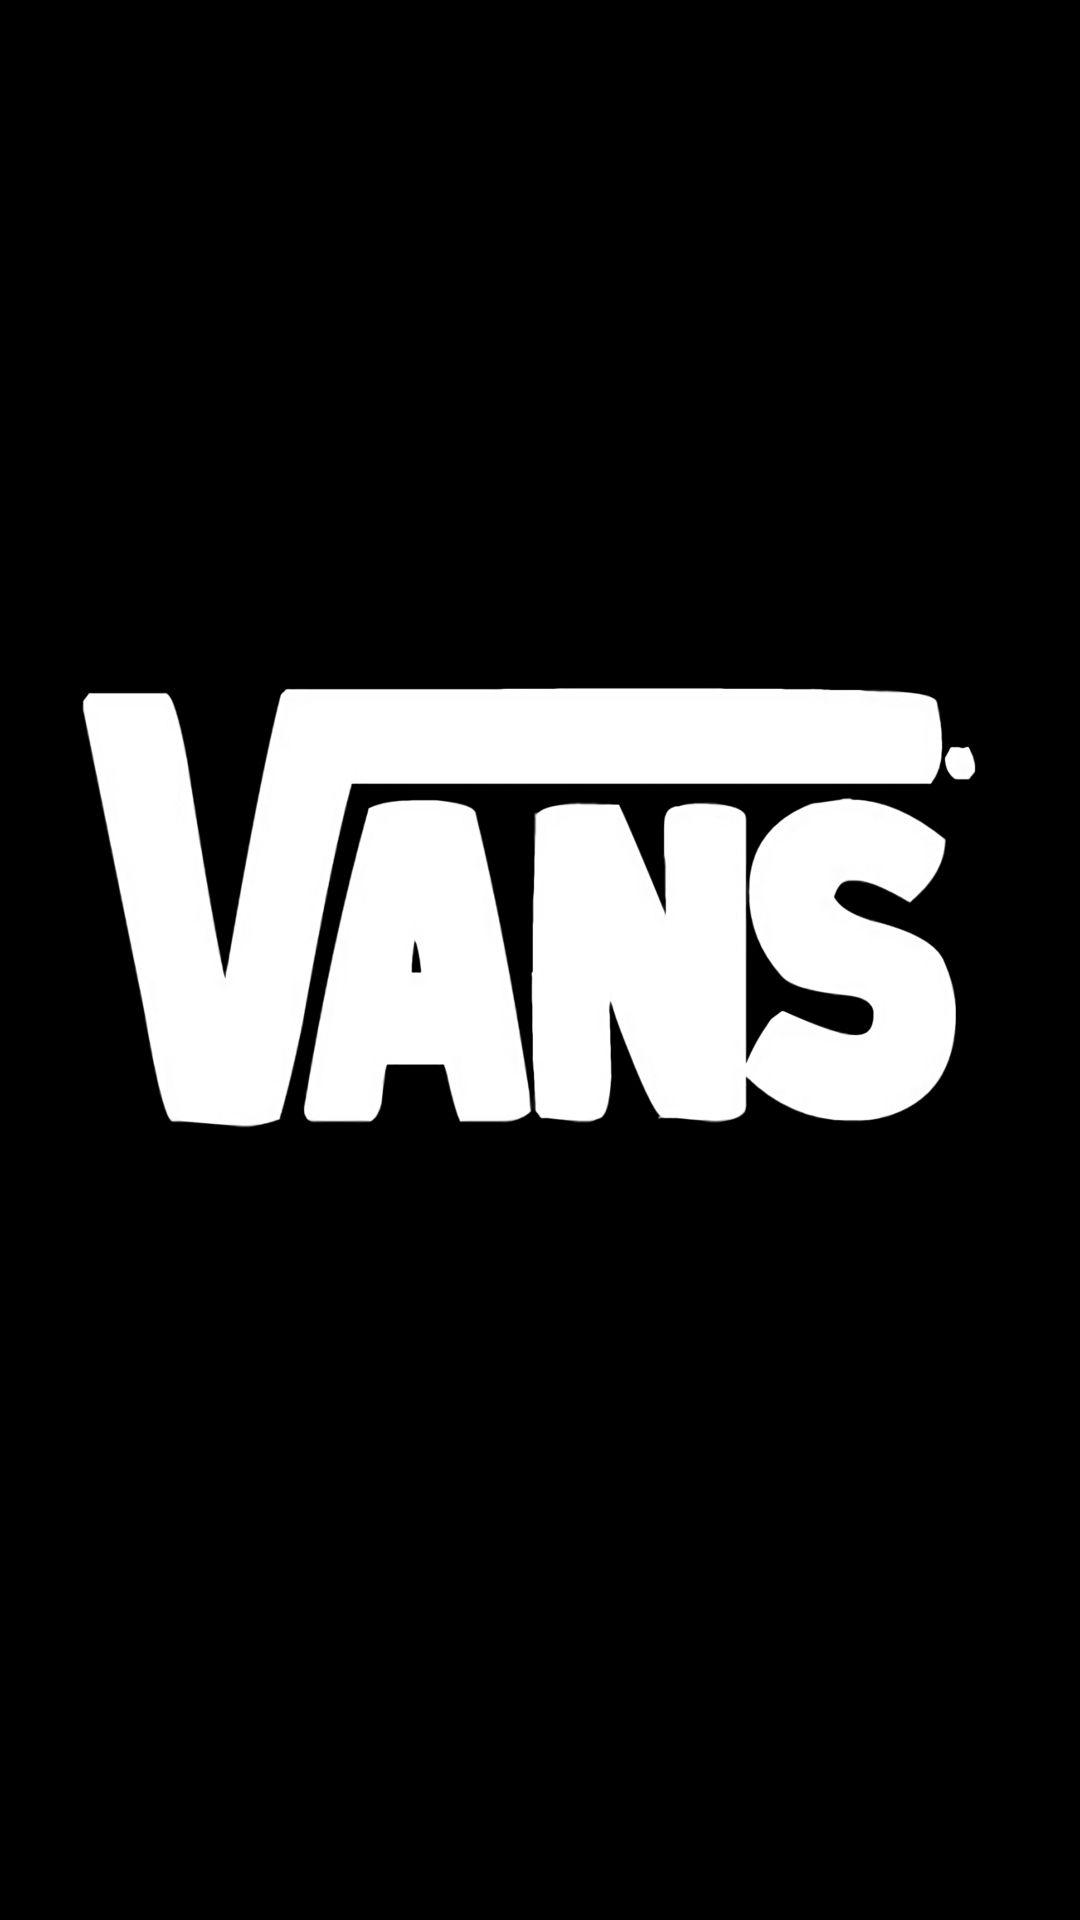 Vans to see more creative wallpaper! - iPhone 8